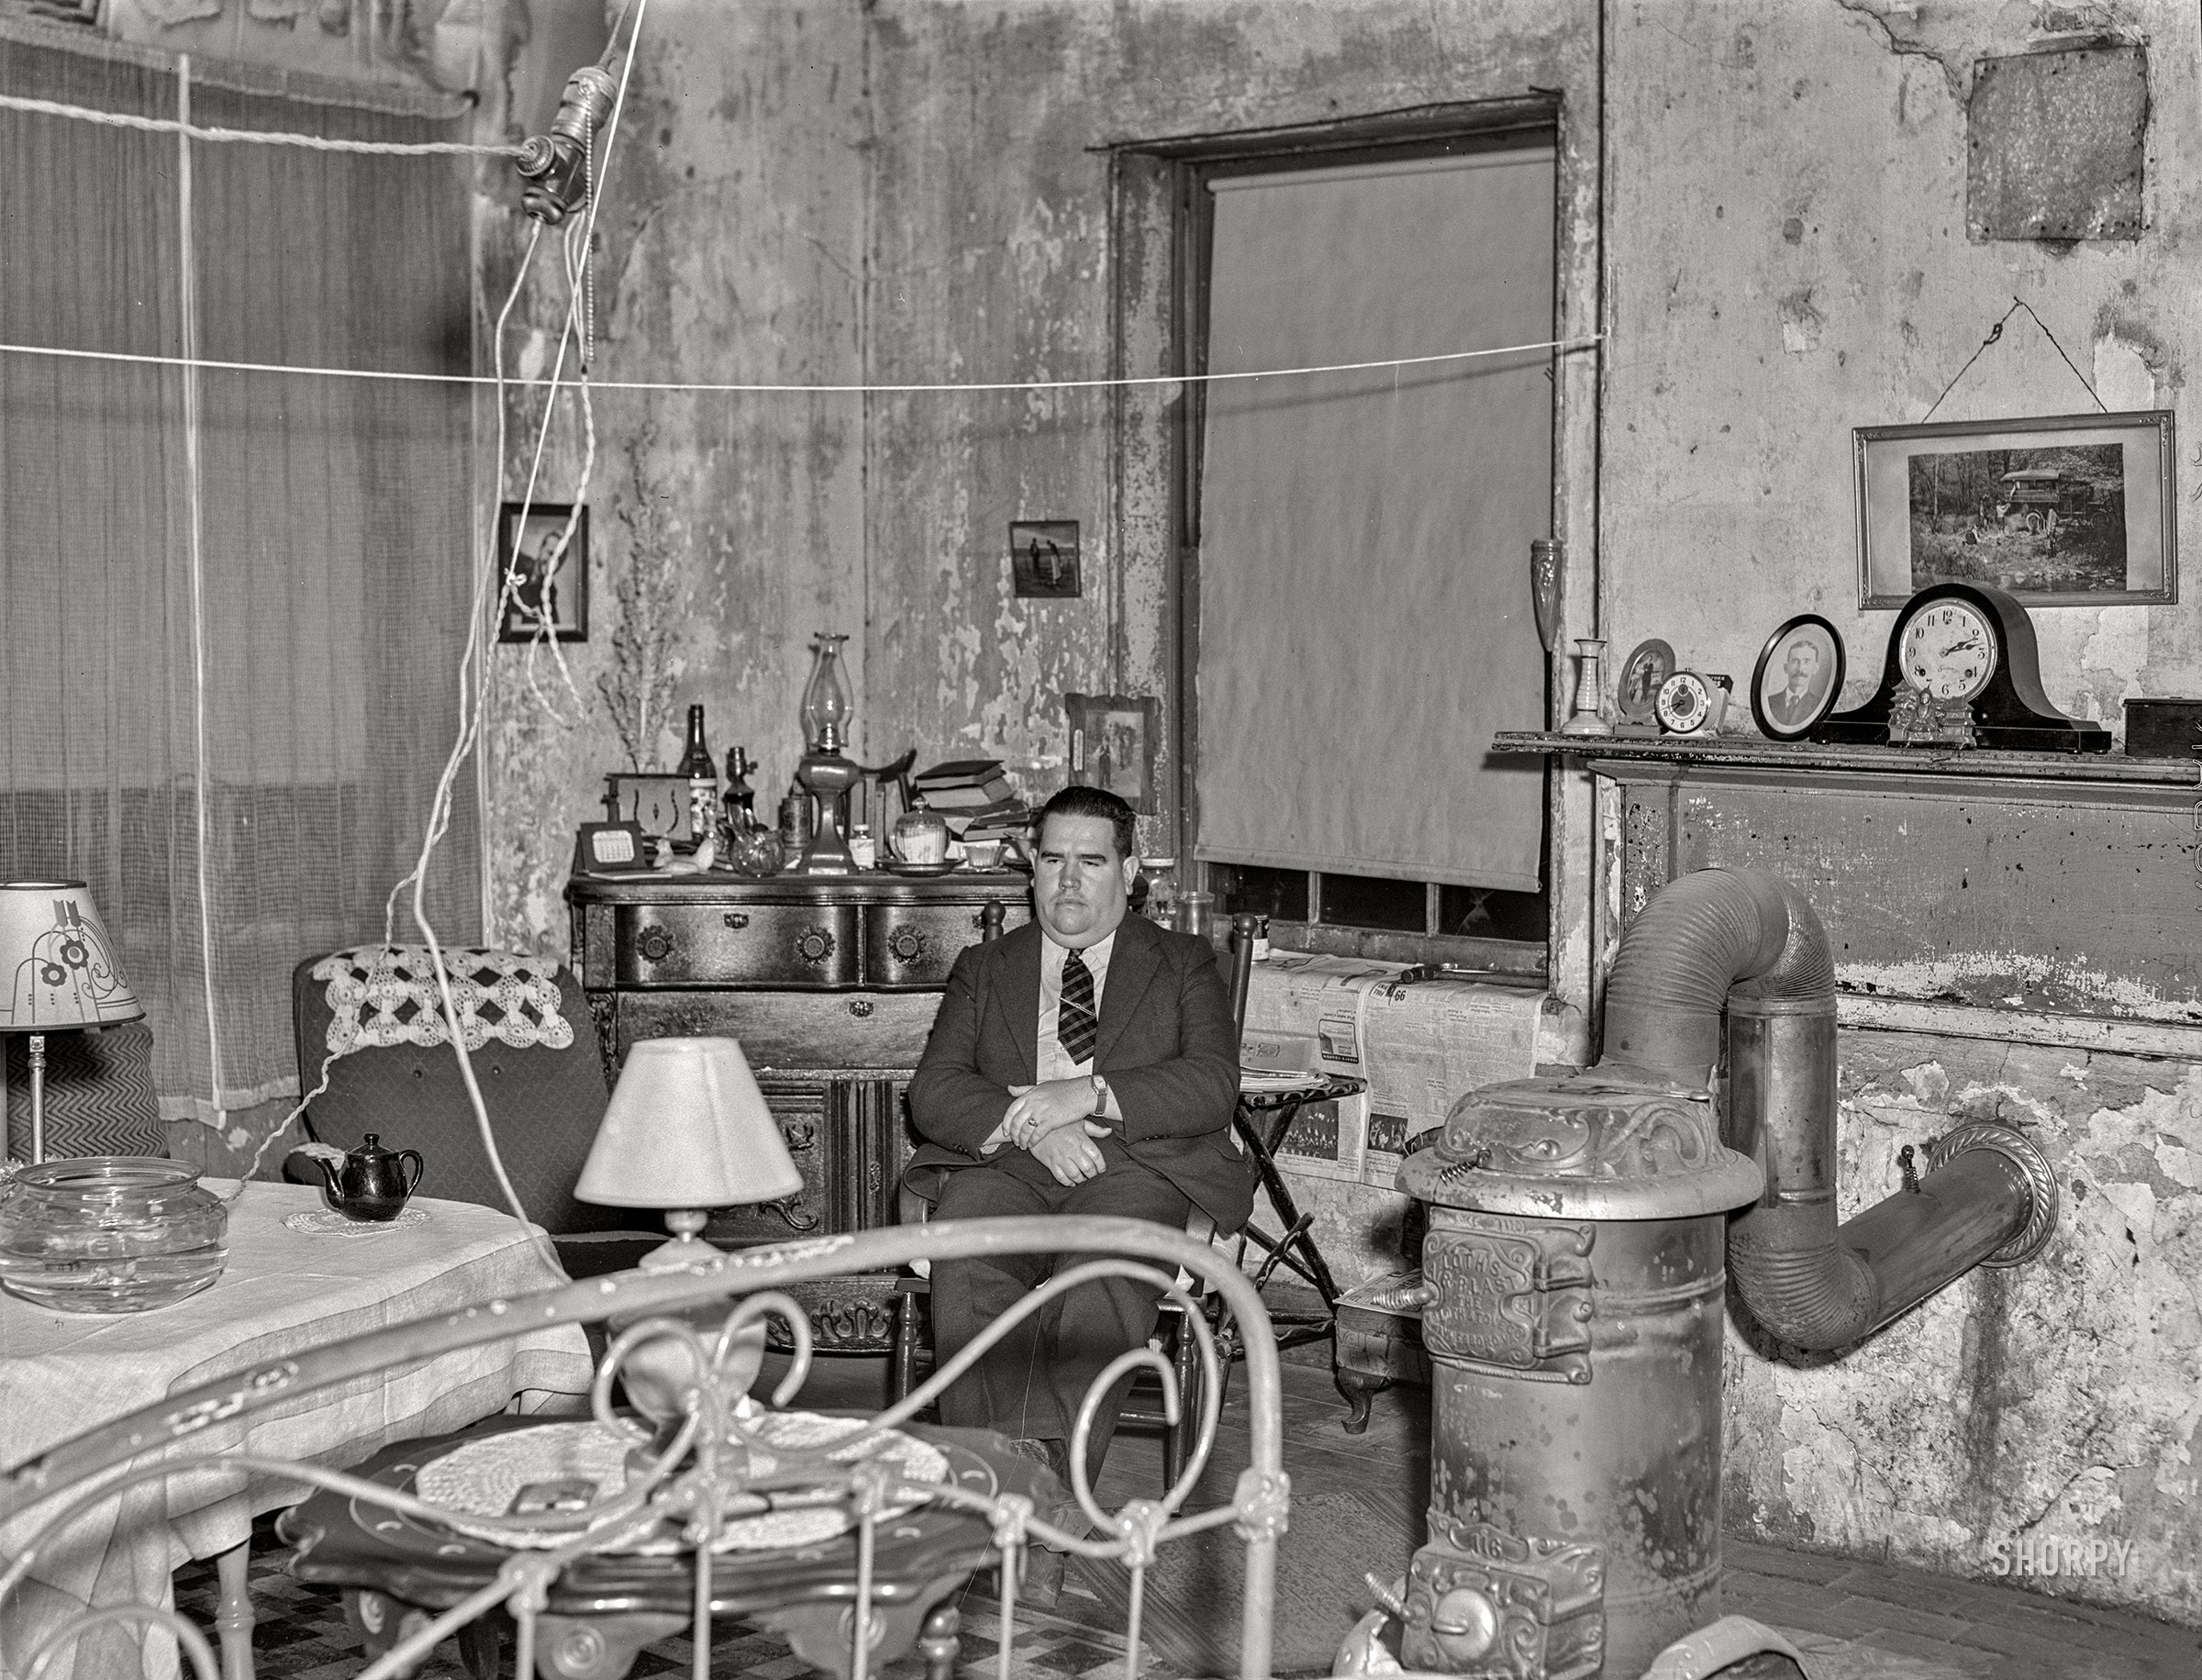 March 1941. "Mission pianist in his room at the Helping Hand Mission. Portsmouth, Virginia." Acetate negative by John Vachon for the Farm Security Administration. View full size.